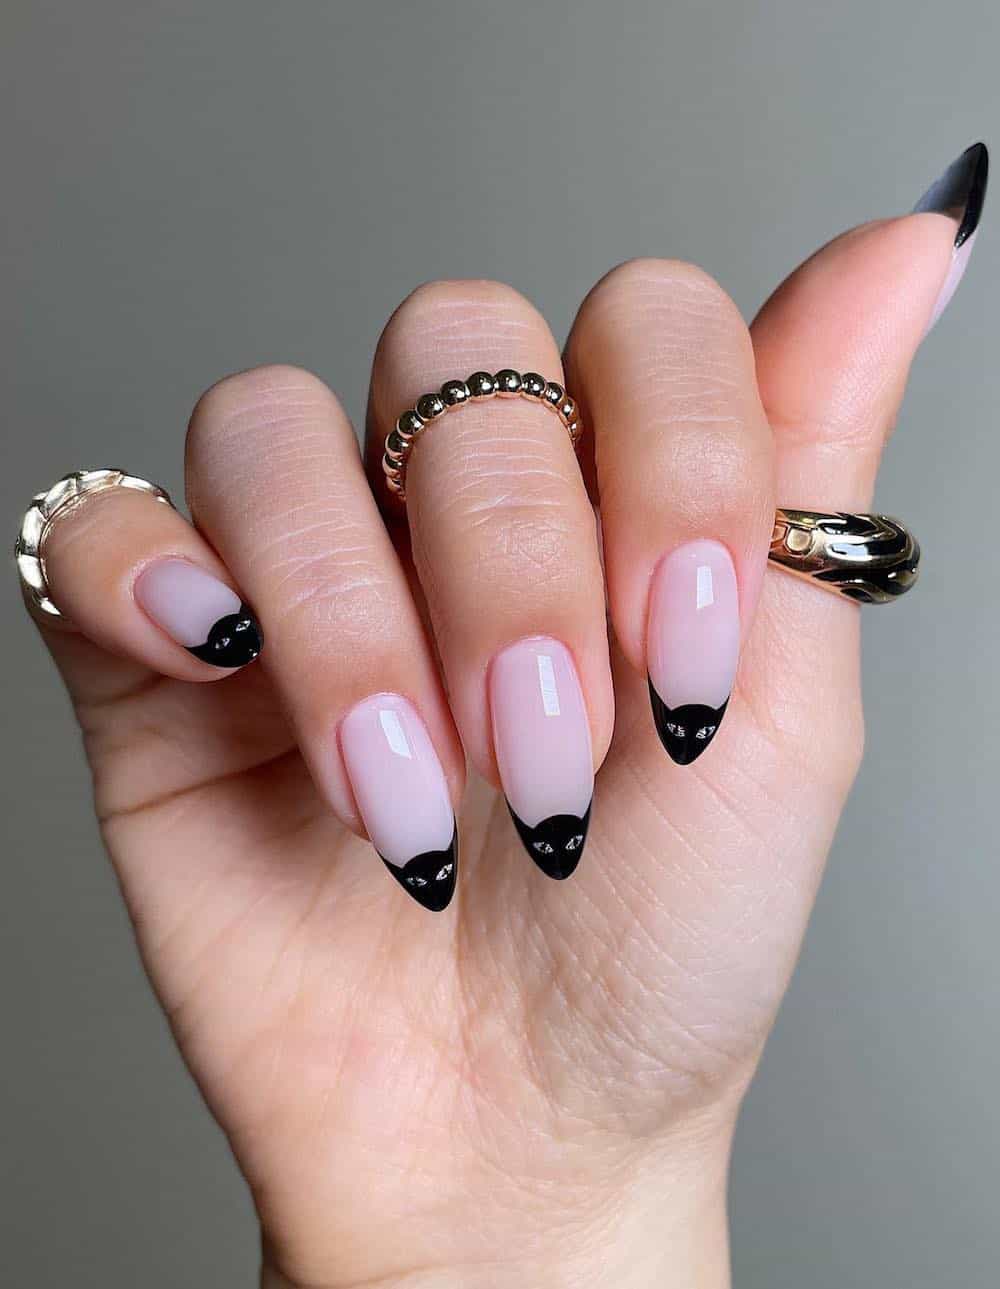 long nude pink almond nails with black cat tips